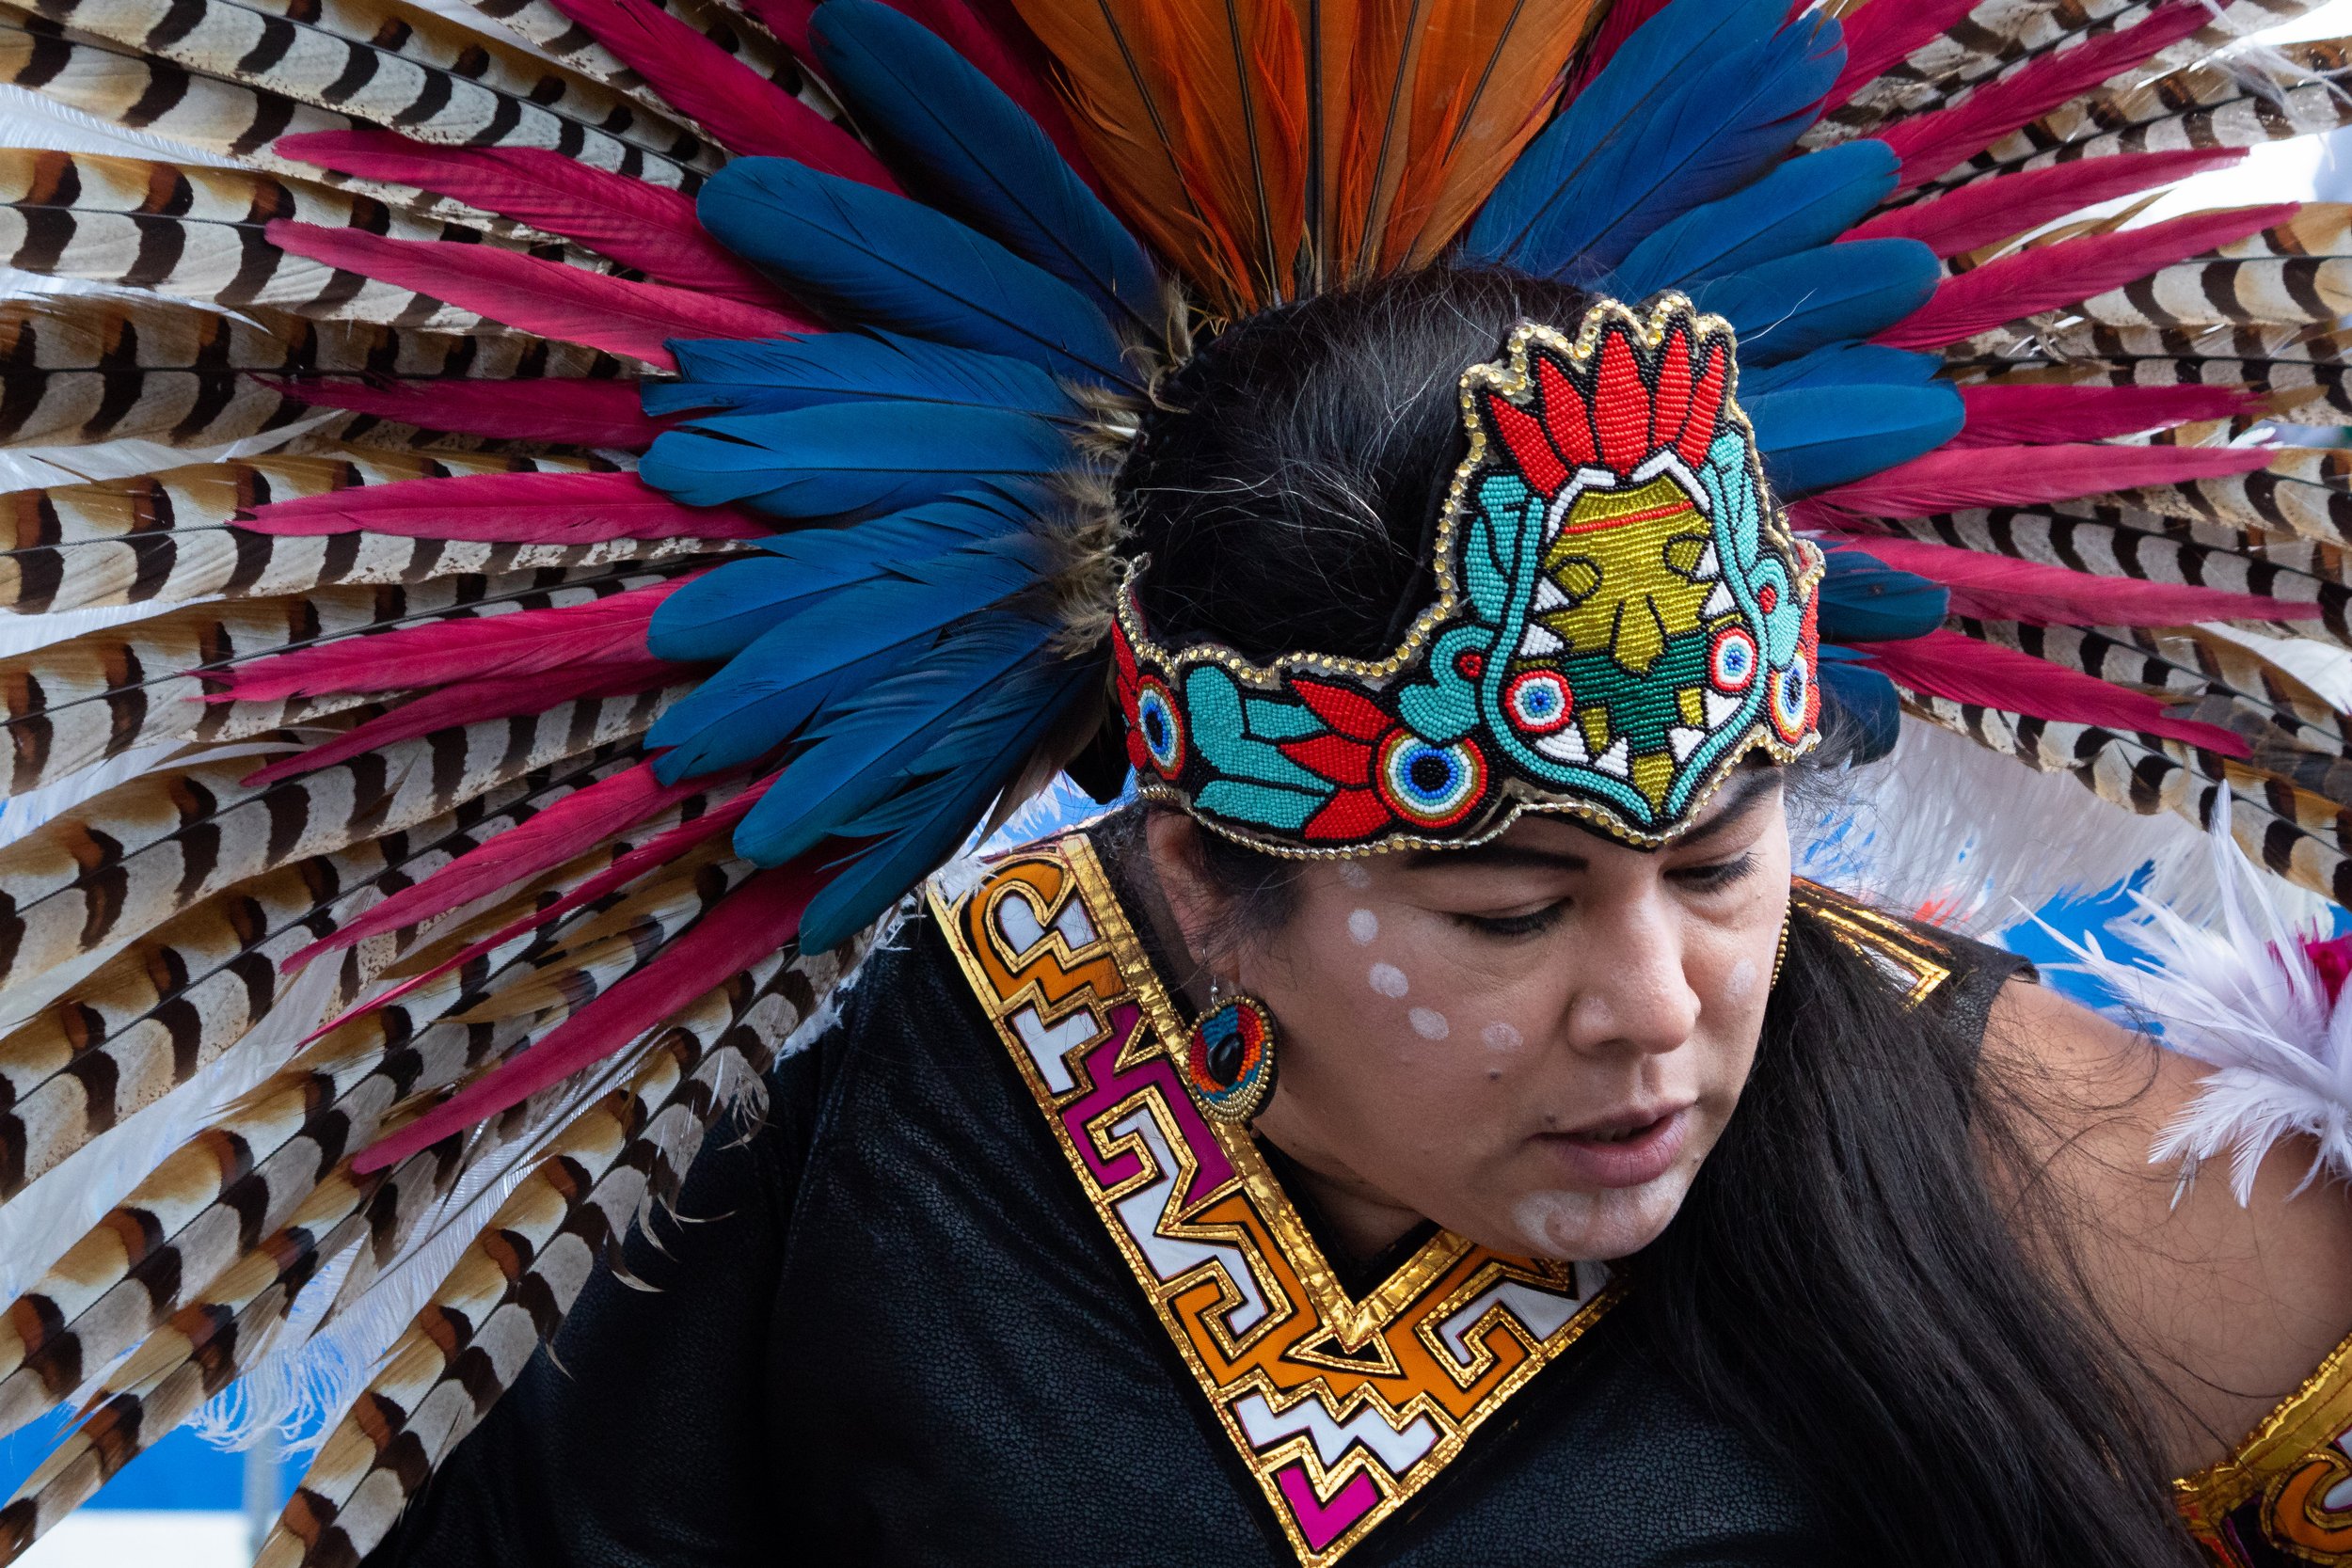  A performer doing a traditional  Aztec dance during the Mexican Independence Day Parade & Festival, in East Los Angeles, Calif. on Sept. 18, 2022. (Caylo Seals | The Corsair) 